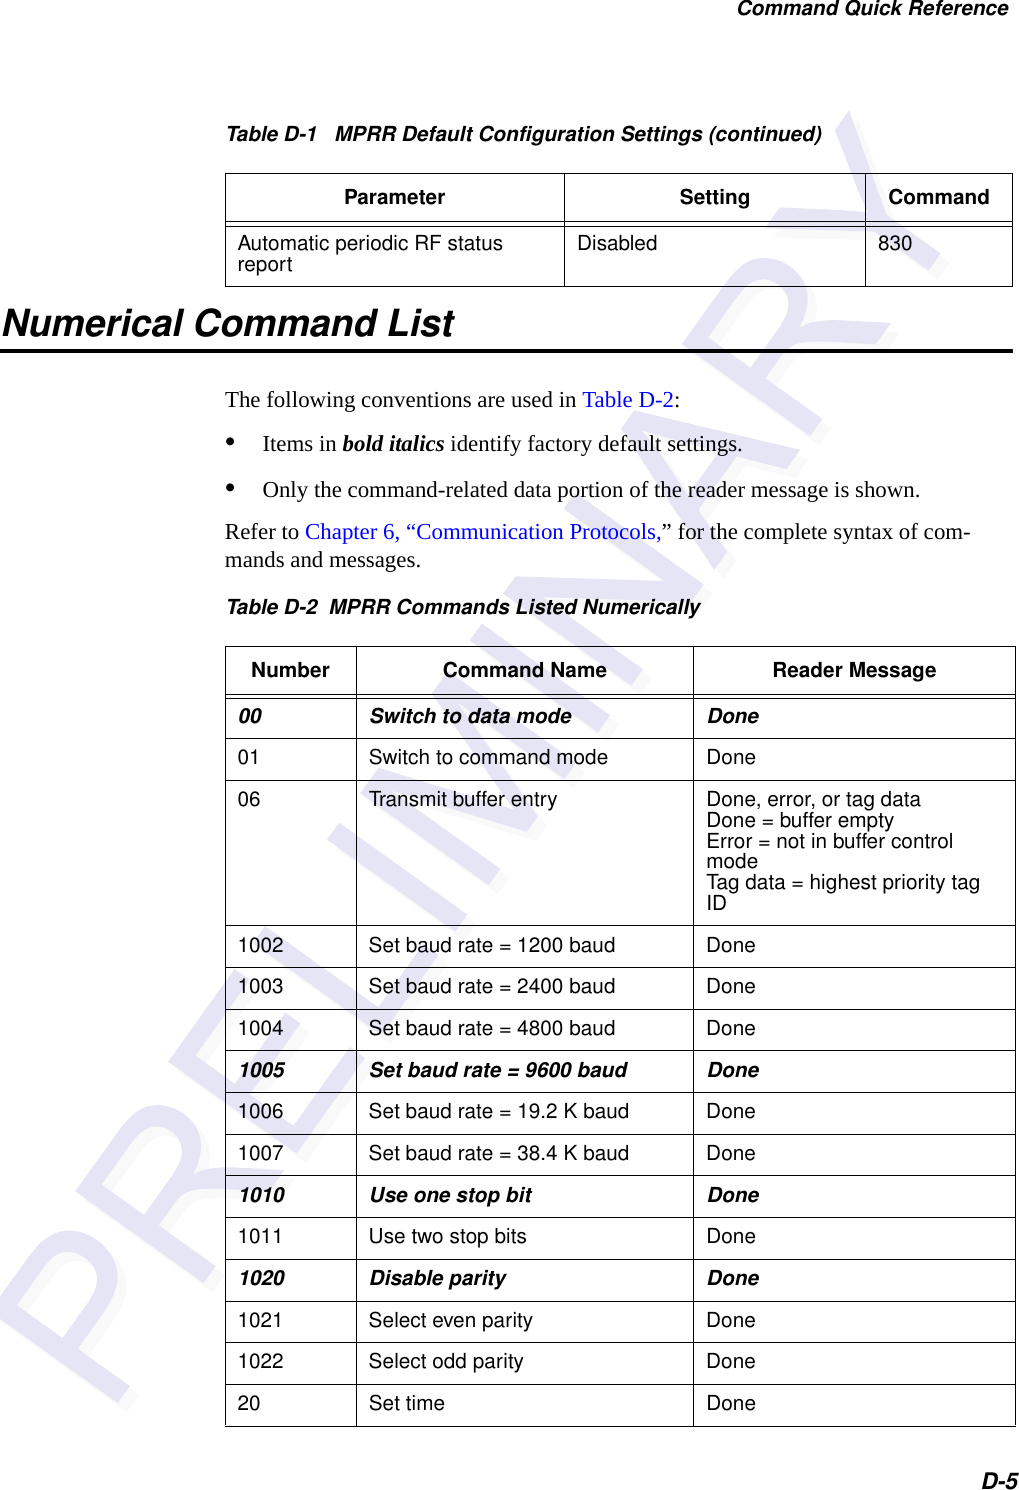 Command Quick ReferenceD-5Numerical Command ListThe following conventions are used in Table D-2: •Items in bold italics identify factory default settings.•Only the command-related data portion of the reader message is shown.Refer to Chapter 6, “Communication Protocols,” for the complete syntax of com-mands and messages. Automatic periodic RF status report Disabled 830Table D-1   MPRR Default Configuration Settings (continued)Parameter Setting CommandTable D-2  MPRR Commands Listed NumericallyNumber Command Name Reader Message00 Switch to data mode Done01 Switch to command mode Done06 Transmit buffer entry Done, error, or tag dataDone = buffer emptyError = not in buffer control modeTag data = highest priority tag ID1002 Set baud rate = 1200 baud Done1003 Set baud rate = 2400 baud Done1004 Set baud rate = 4800 baud Done1005 Set baud rate = 9600 baud Done1006 Set baud rate = 19.2 K baud Done1007 Set baud rate = 38.4 K baud Done1010 Use one stop bit Done1011 Use two stop bits Done1020 Disable parity Done1021 Select even parity Done1022 Select odd parity Done20 Set time Done